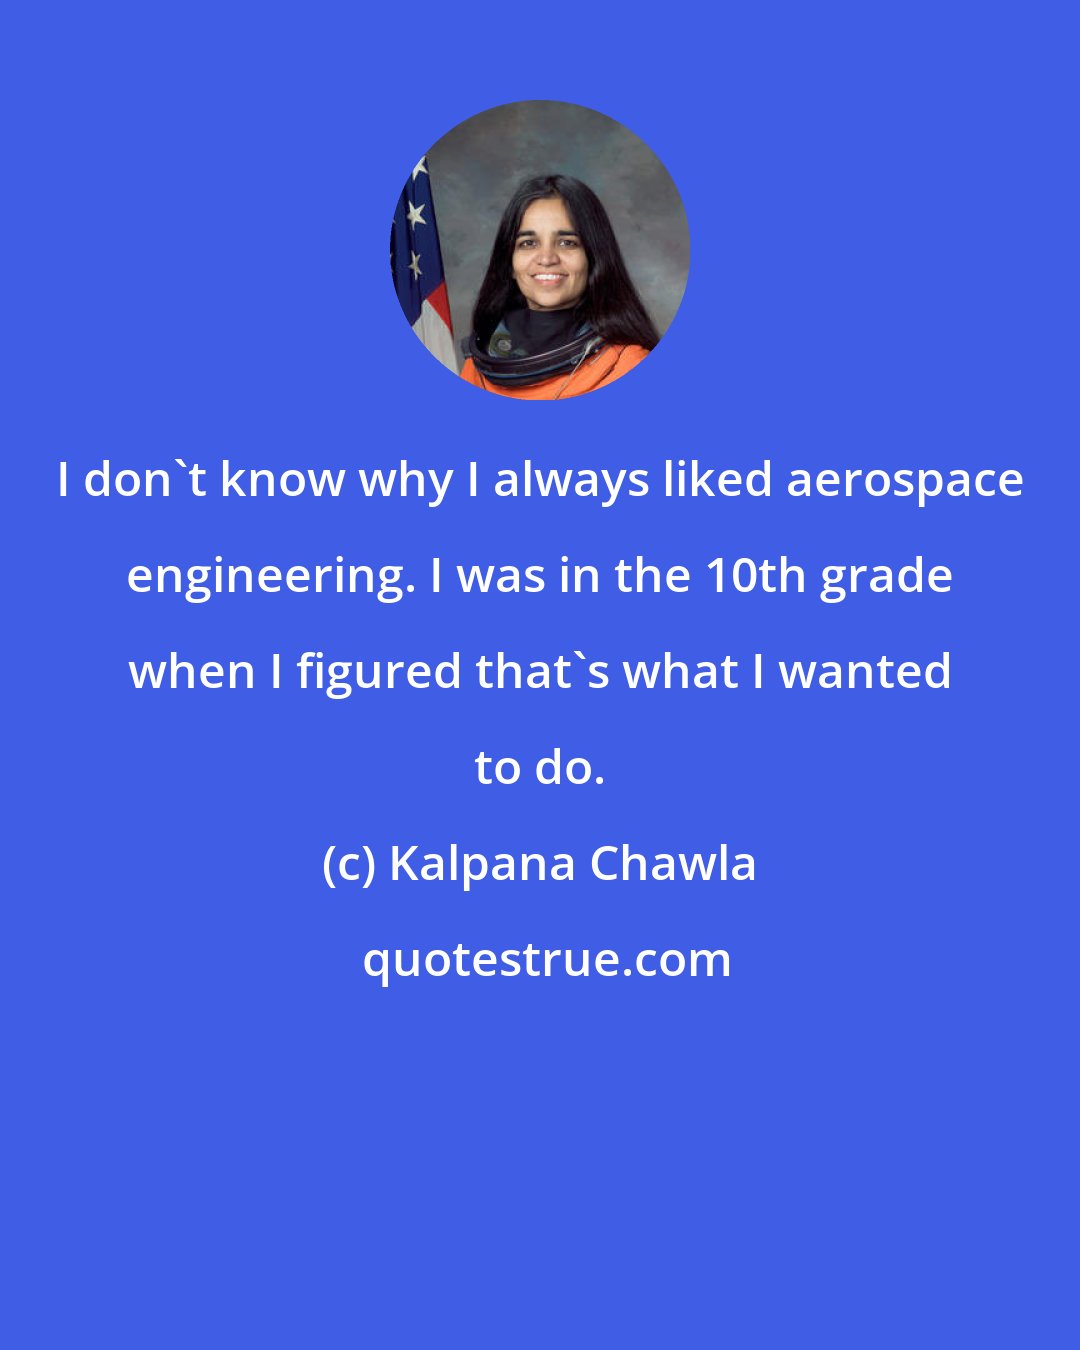 Kalpana Chawla: I don't know why I always liked aerospace engineering. I was in the 10th grade when I figured that's what I wanted to do.